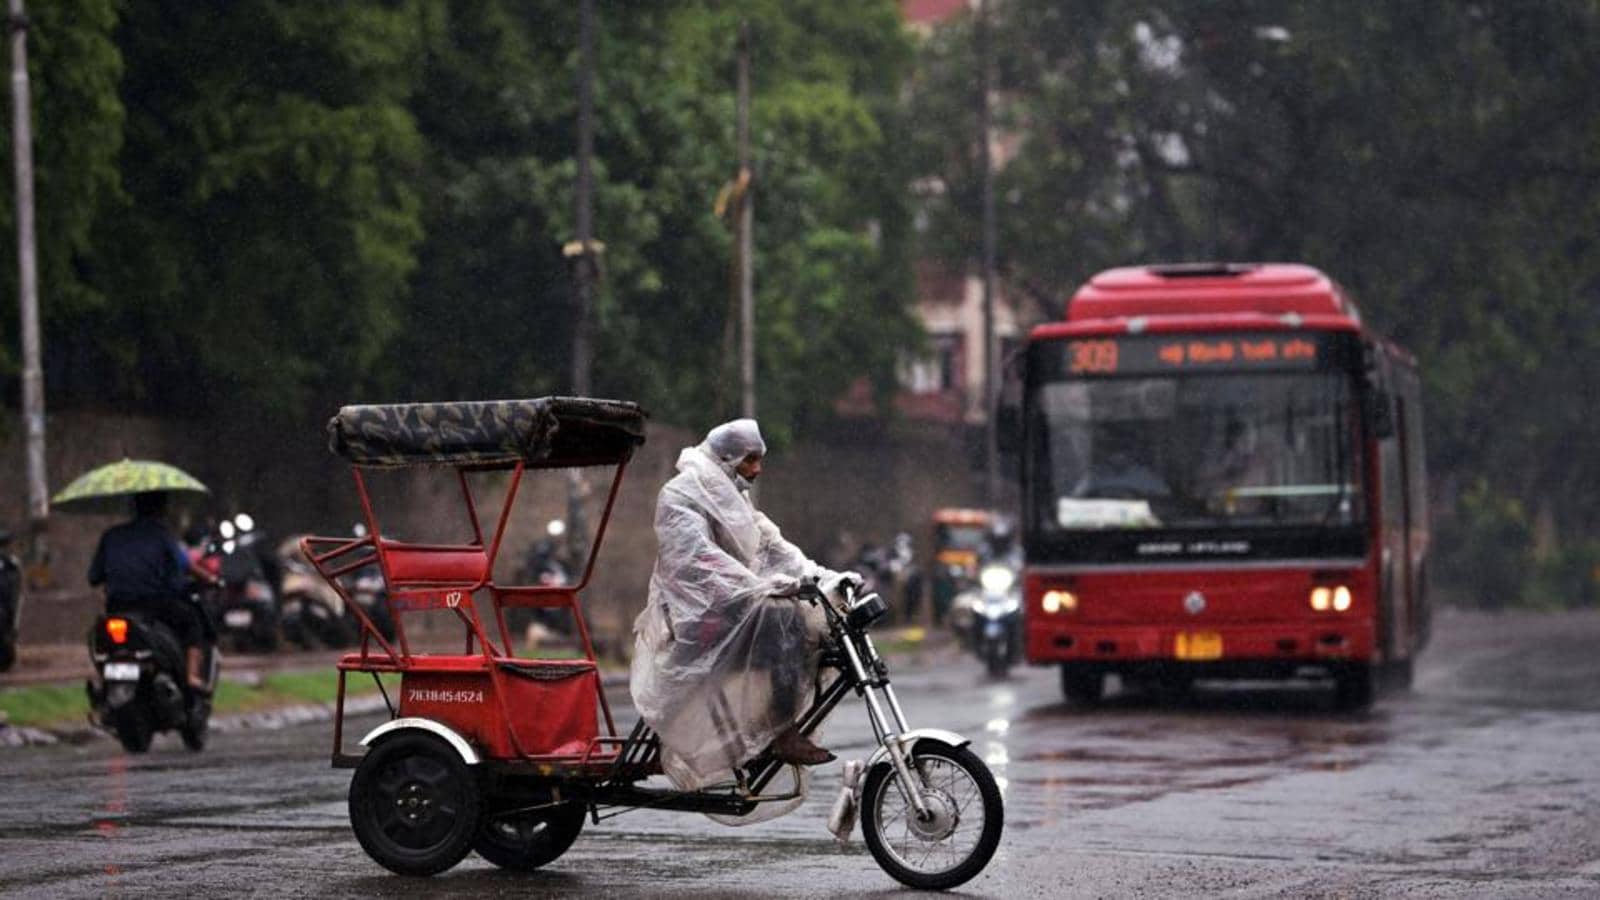 Delhi receives highest rainfall to ever be recorded in May: IMD | Hindustan Times